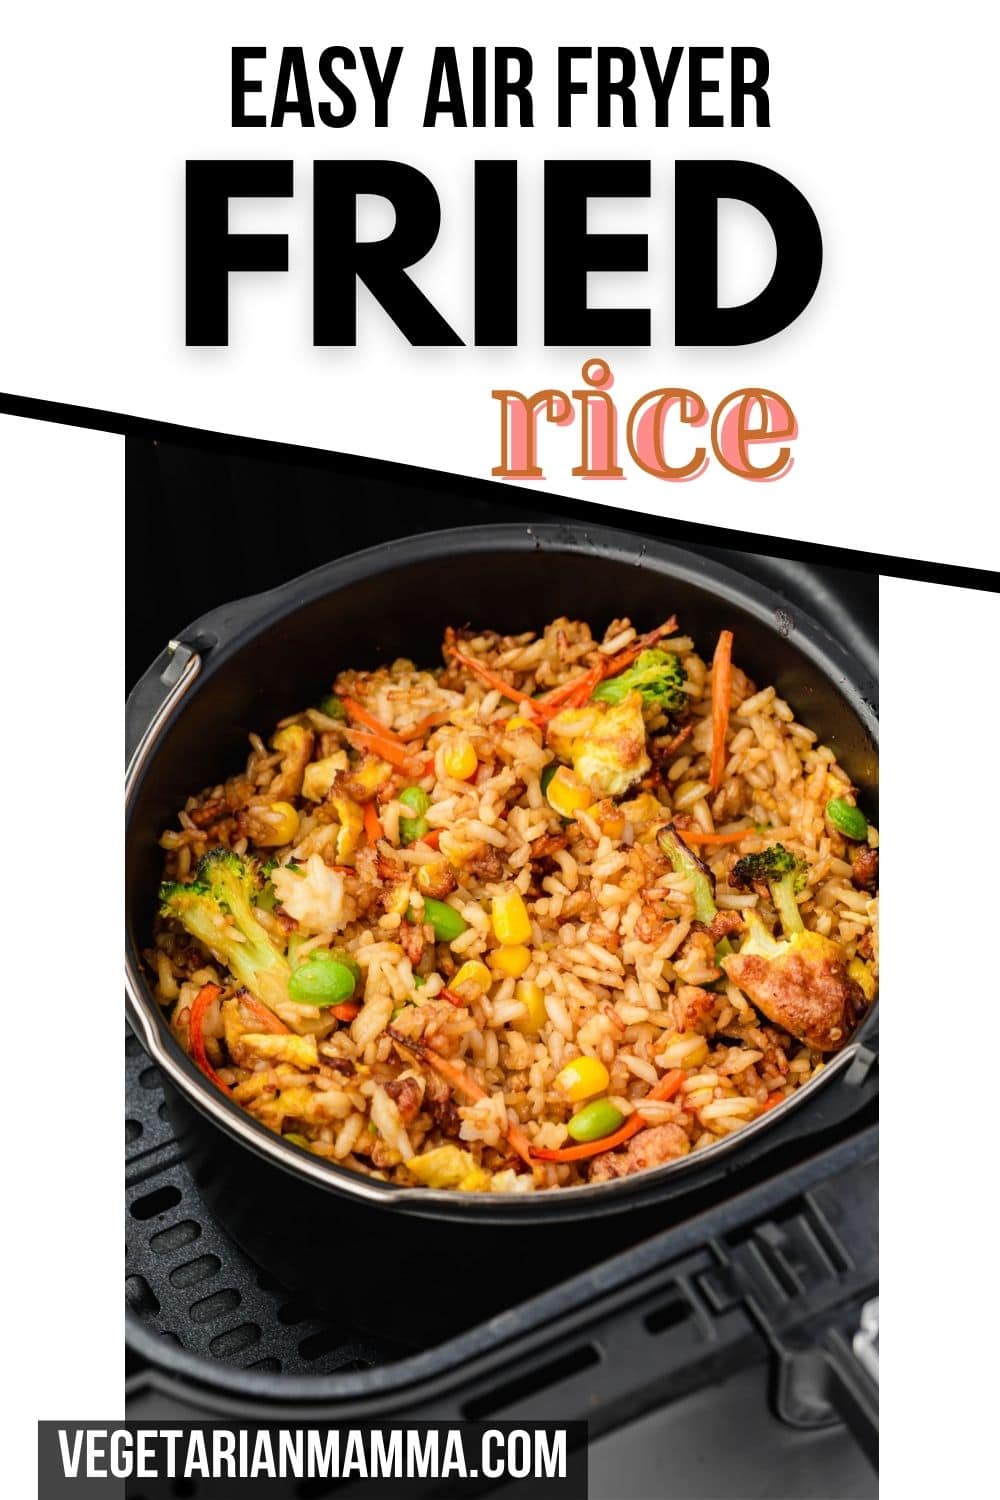 Air Fryer Fried Rice is a quick and easy air fryer recipe. No need to order take out, this air fryer fried rice will make your tummy happy without the hassle of extra oil and salt! #airfryer #friedrice